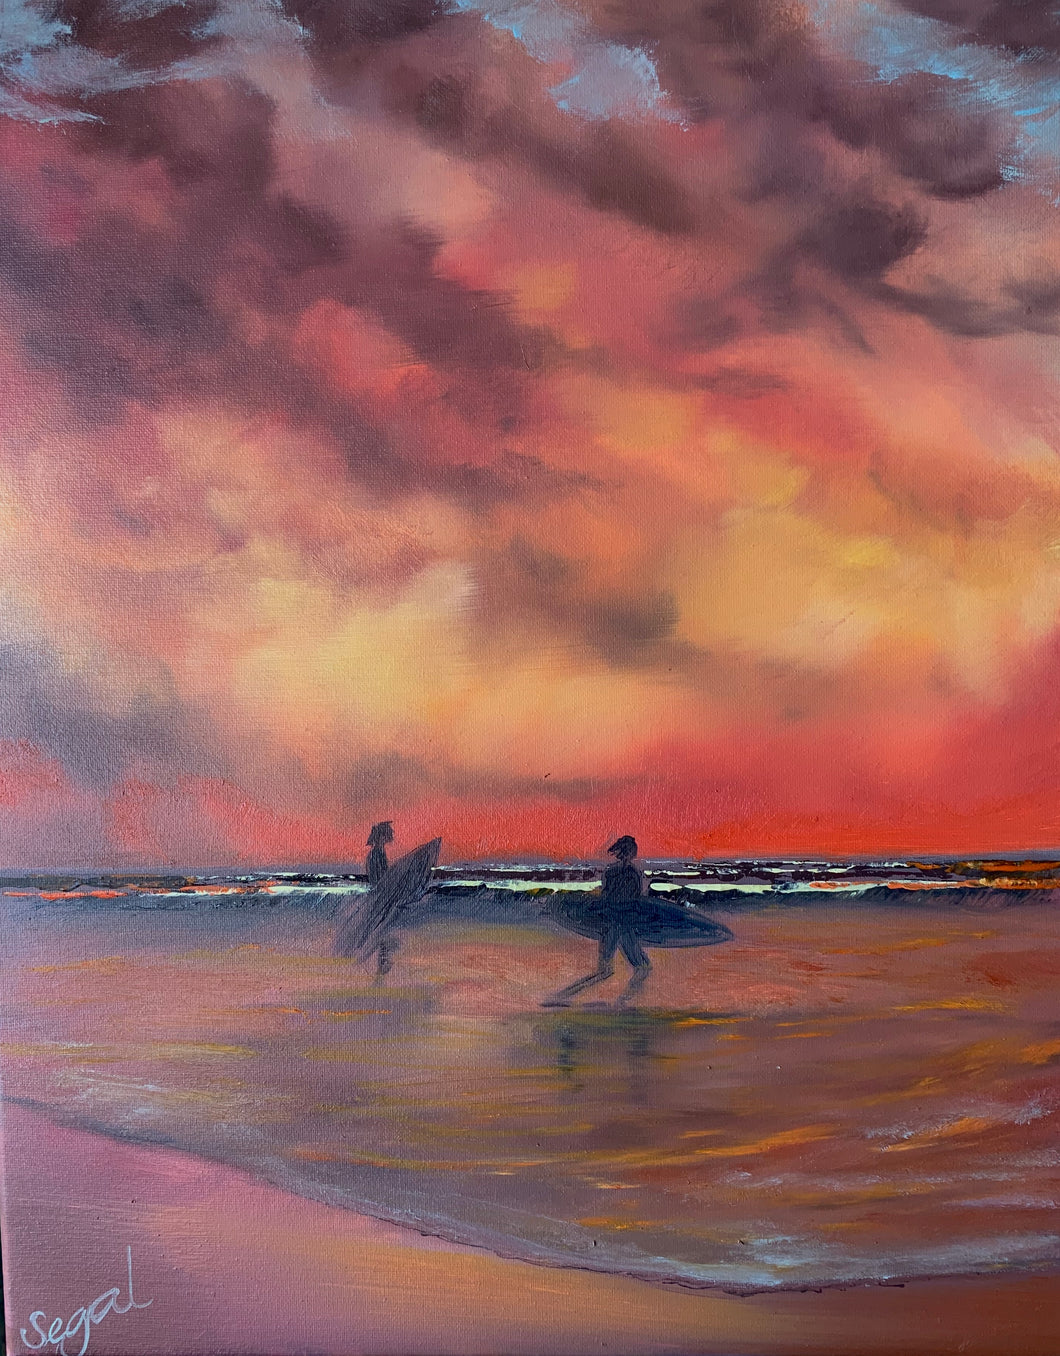 One More Ride - 16x20 Oil on Canvas